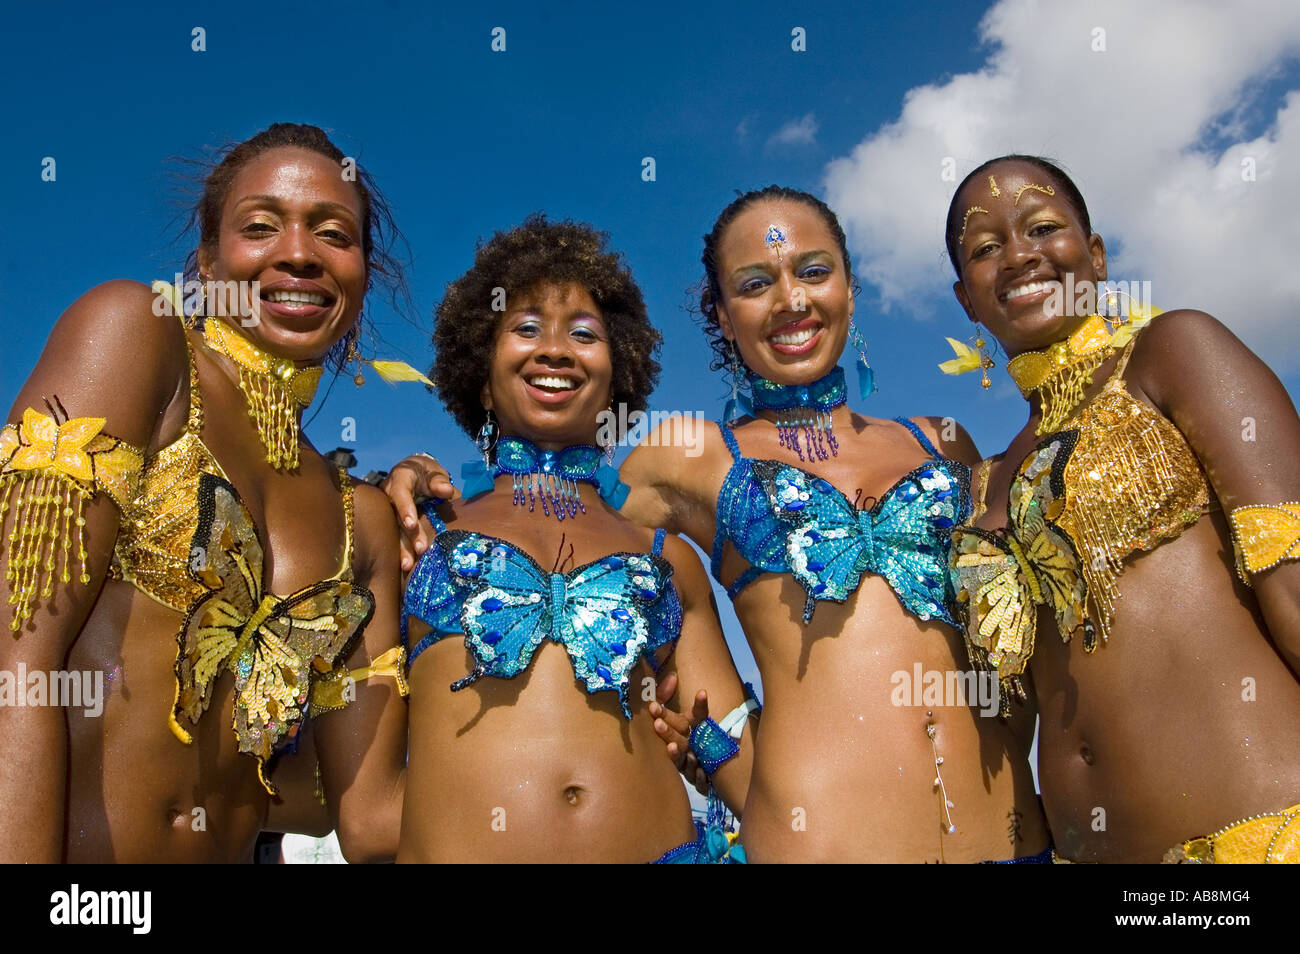 West Indies Port of Spain Trinidad Carnival Close-up of celebrating dancers on mainstage in colorful costumes. Stock Photo